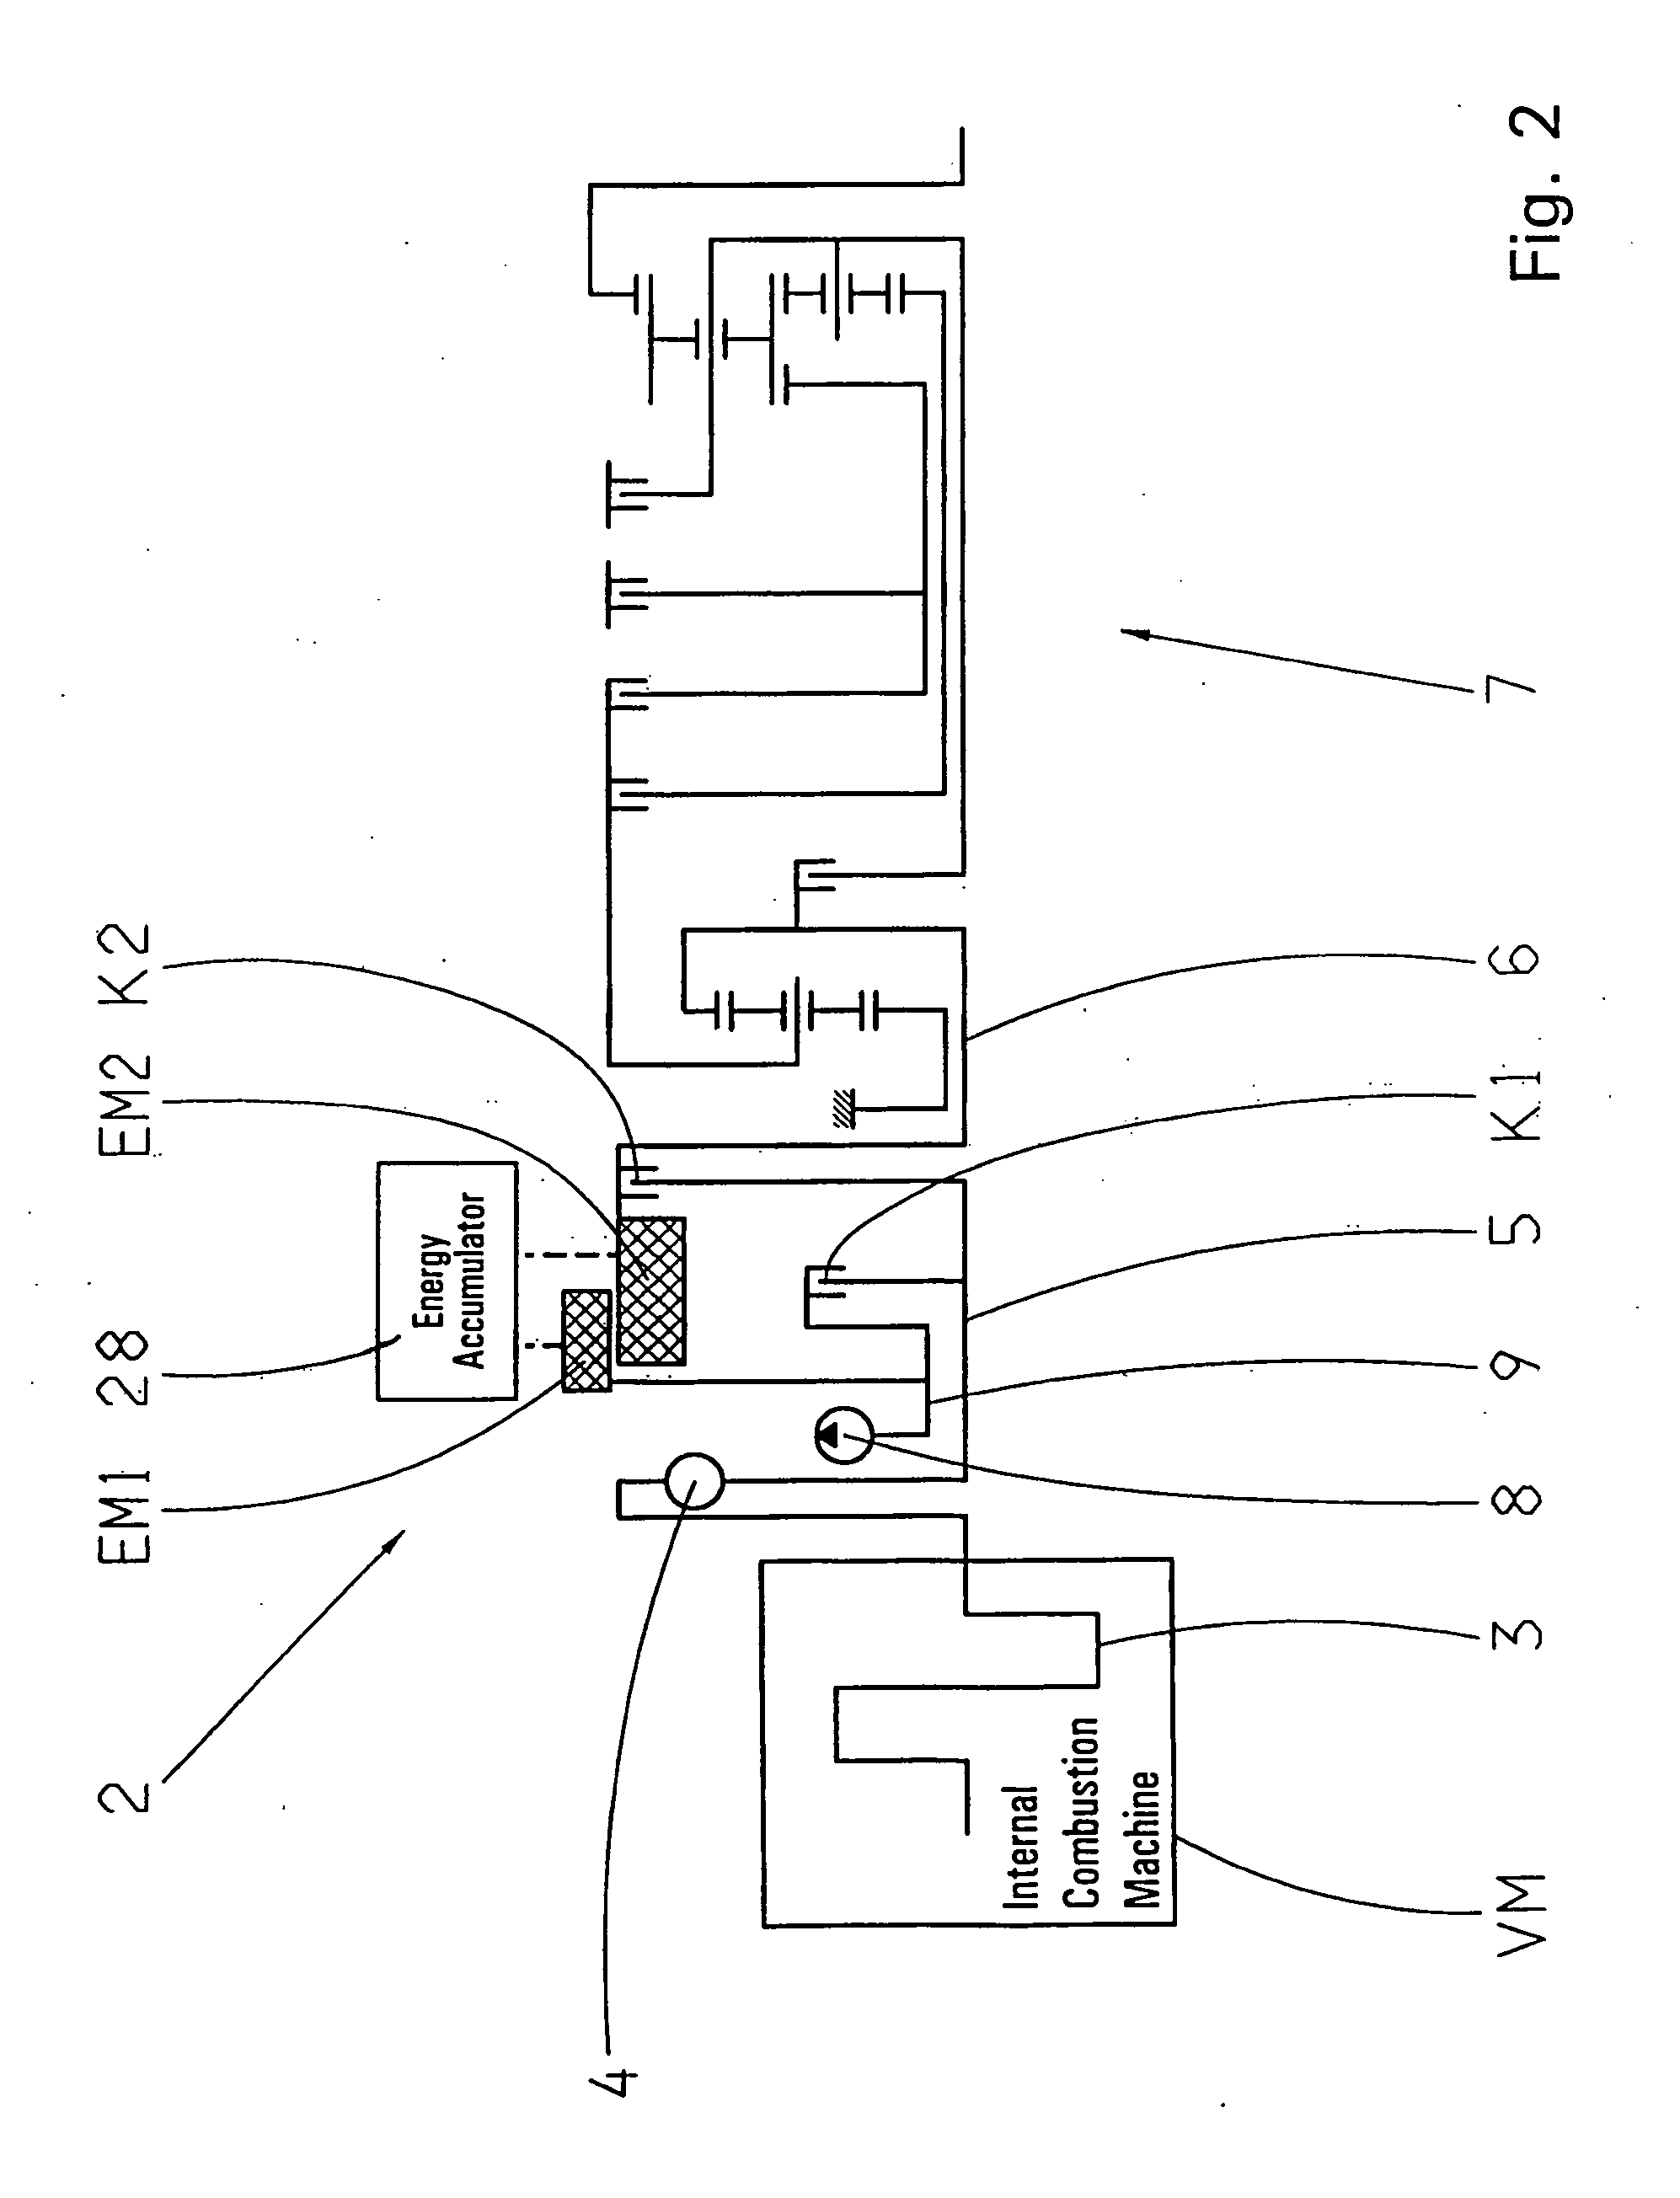 Device and method for steering and regulating components of a hybrid driveline of a vehicle